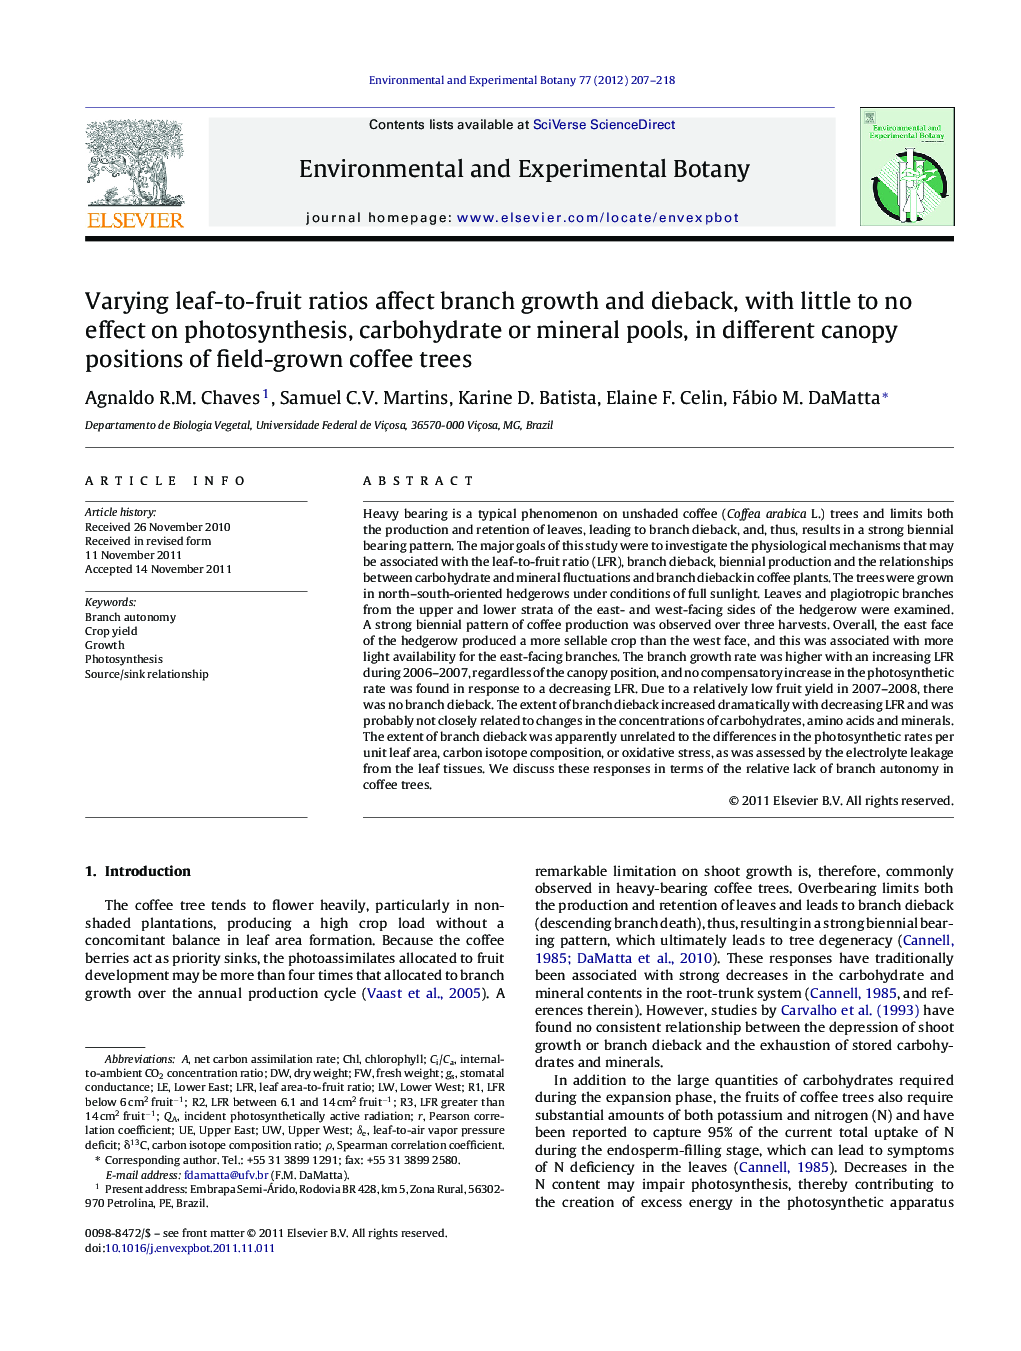 Varying leaf-to-fruit ratios affect branch growth and dieback, with little to no effect on photosynthesis, carbohydrate or mineral pools, in different canopy positions of field-grown coffee trees